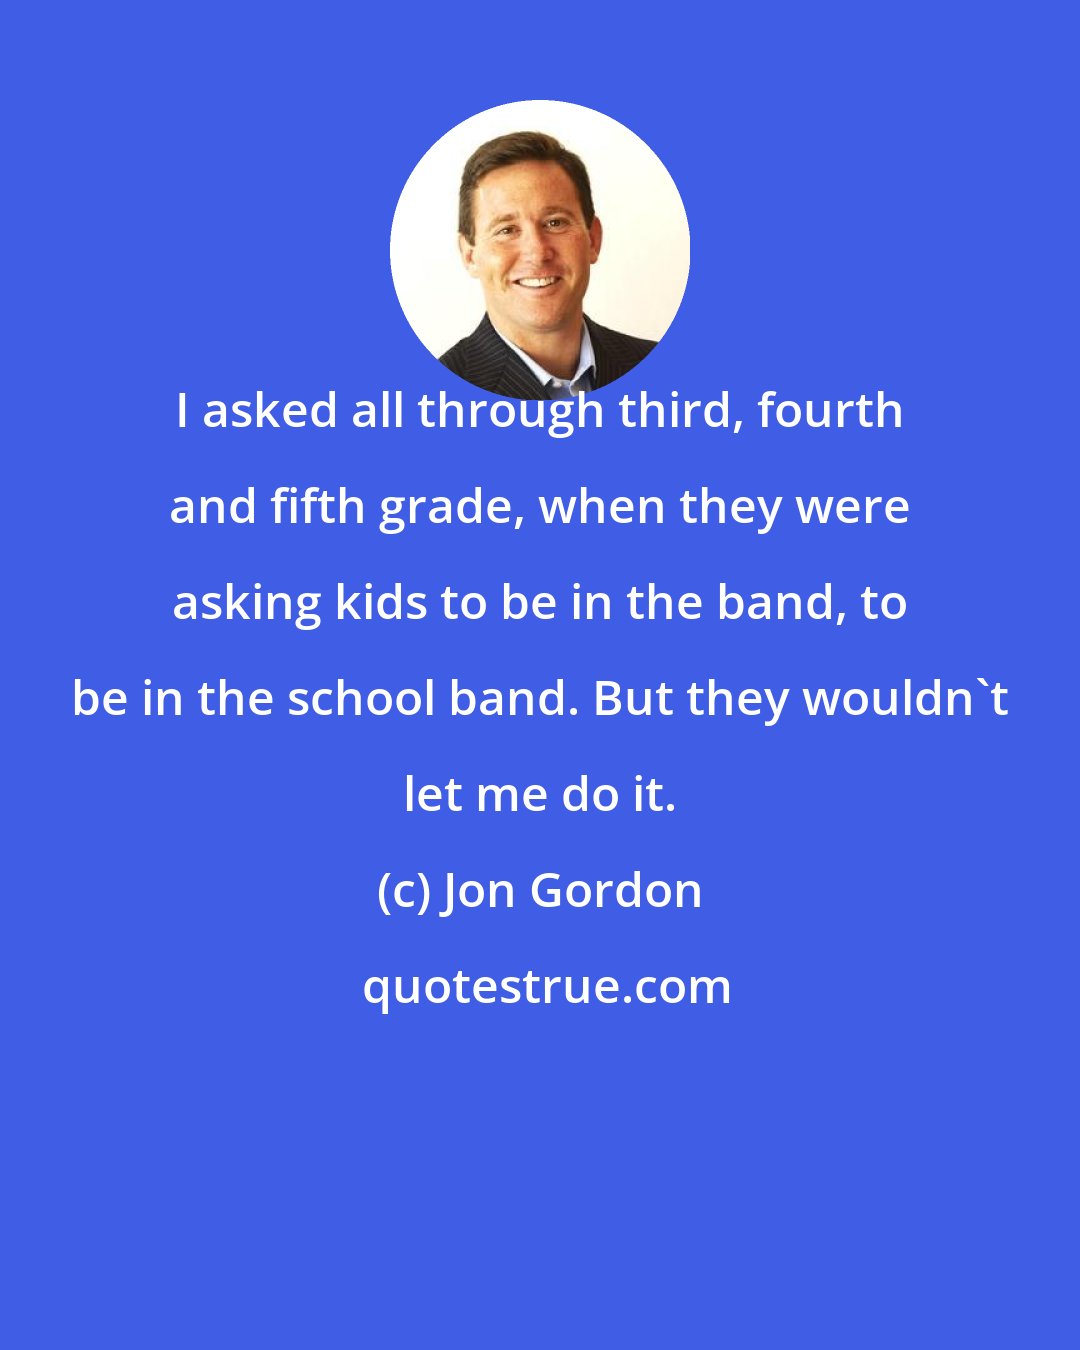 Jon Gordon: I asked all through third, fourth and fifth grade, when they were asking kids to be in the band, to be in the school band. But they wouldn't let me do it.